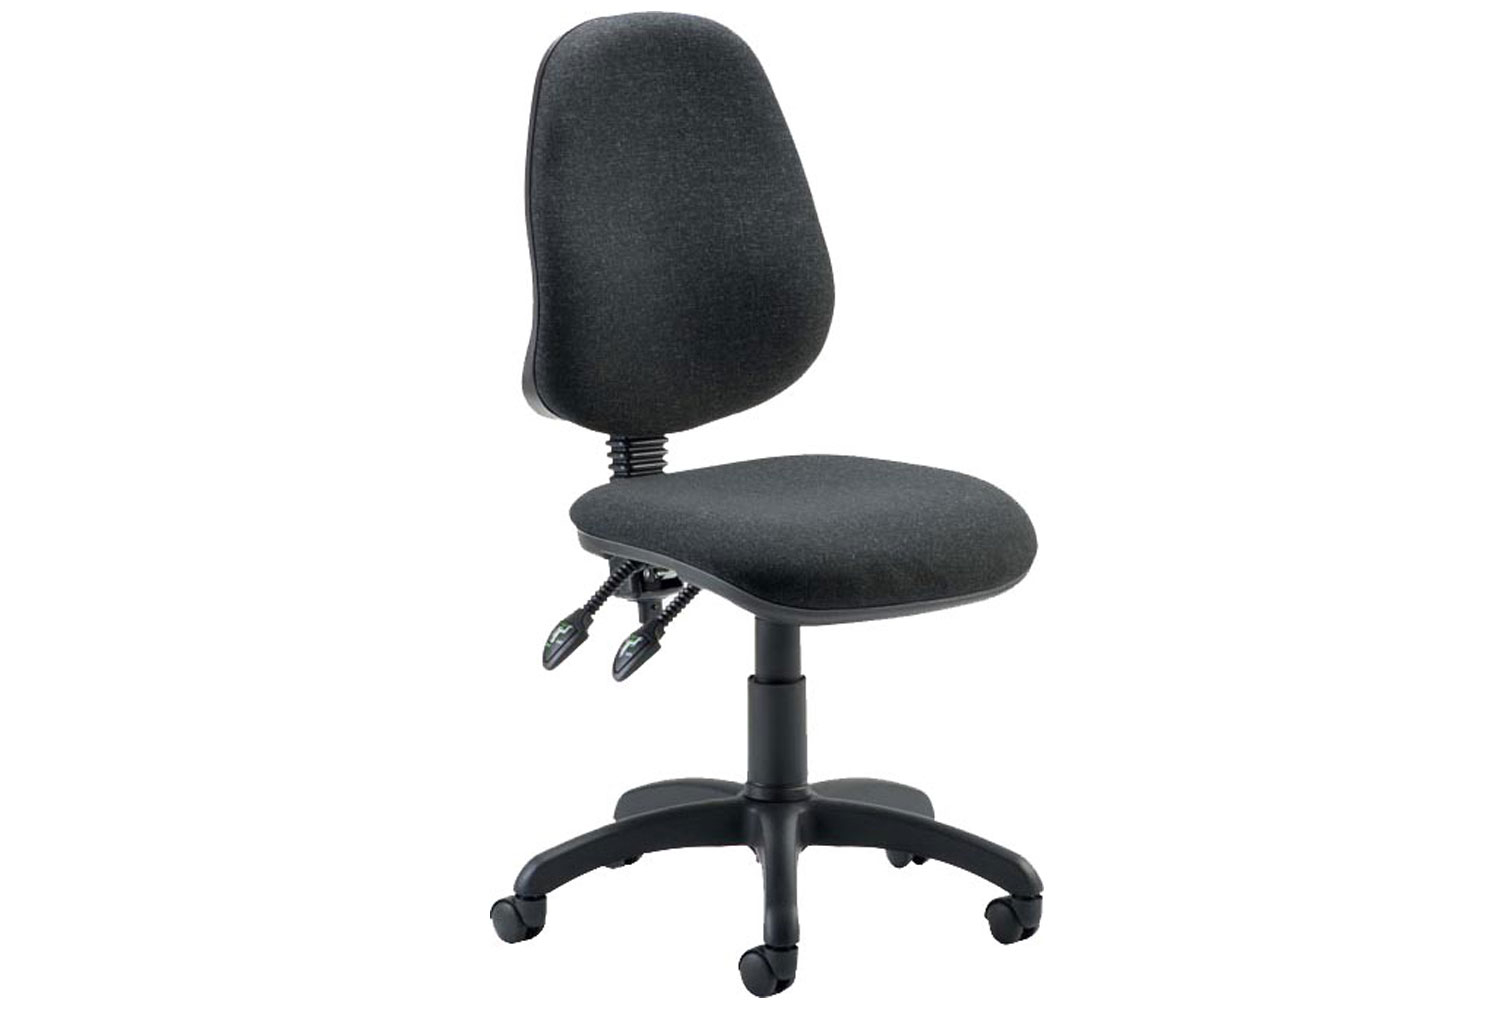 Lunar 2 Lever Operator Office Chair With No Arms, Charcoal, Express Delivery